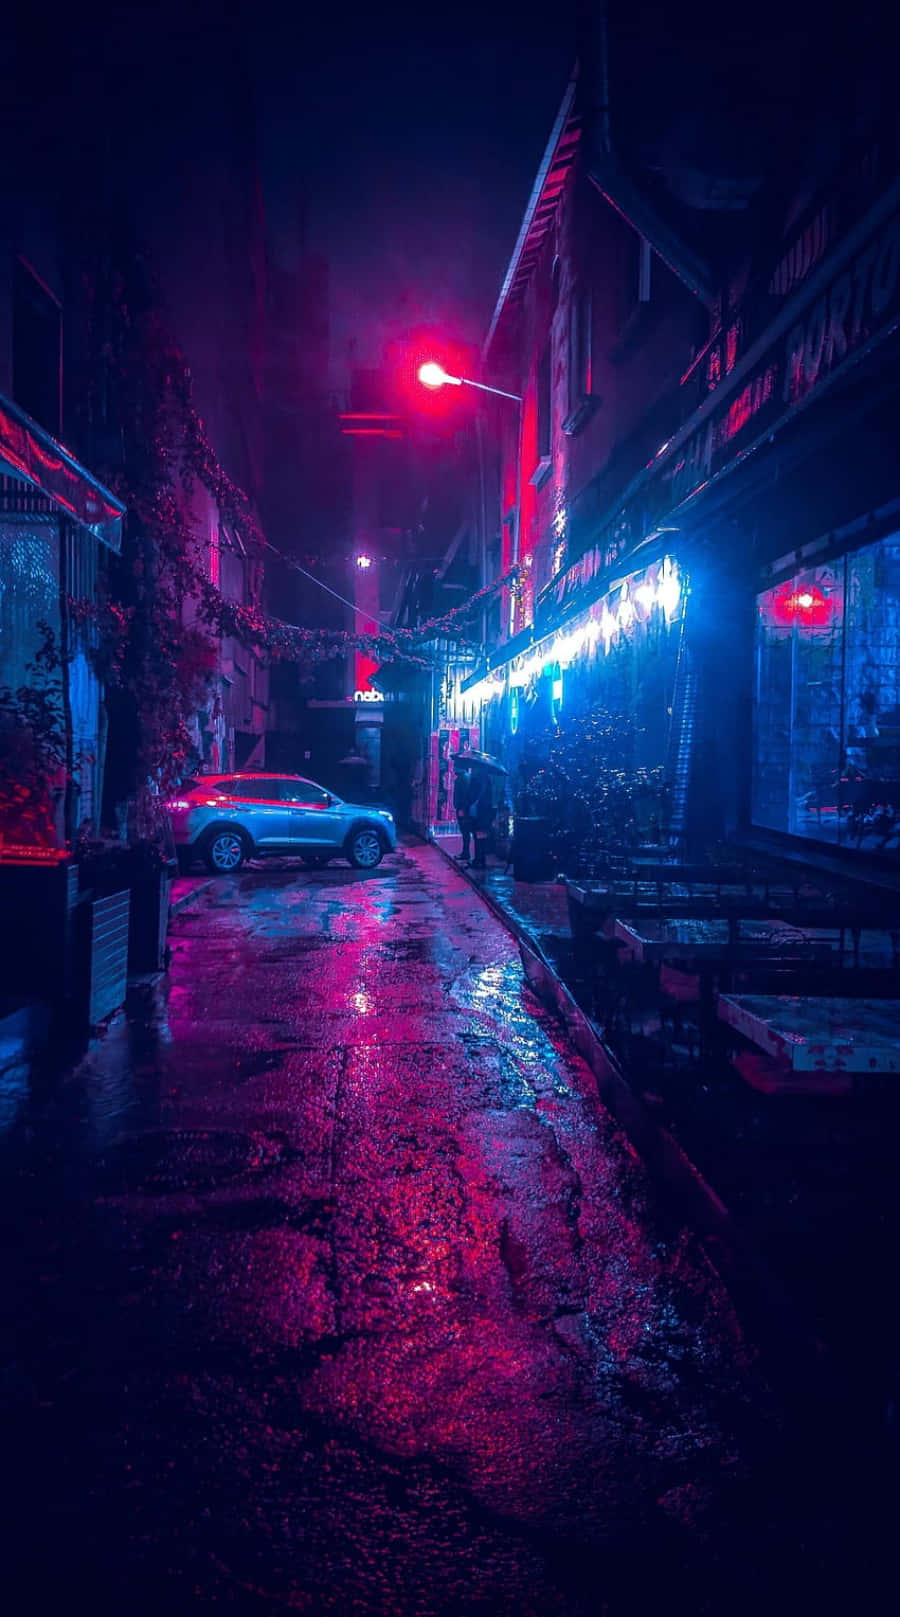 A Street With Neon Lights And Cars At Night